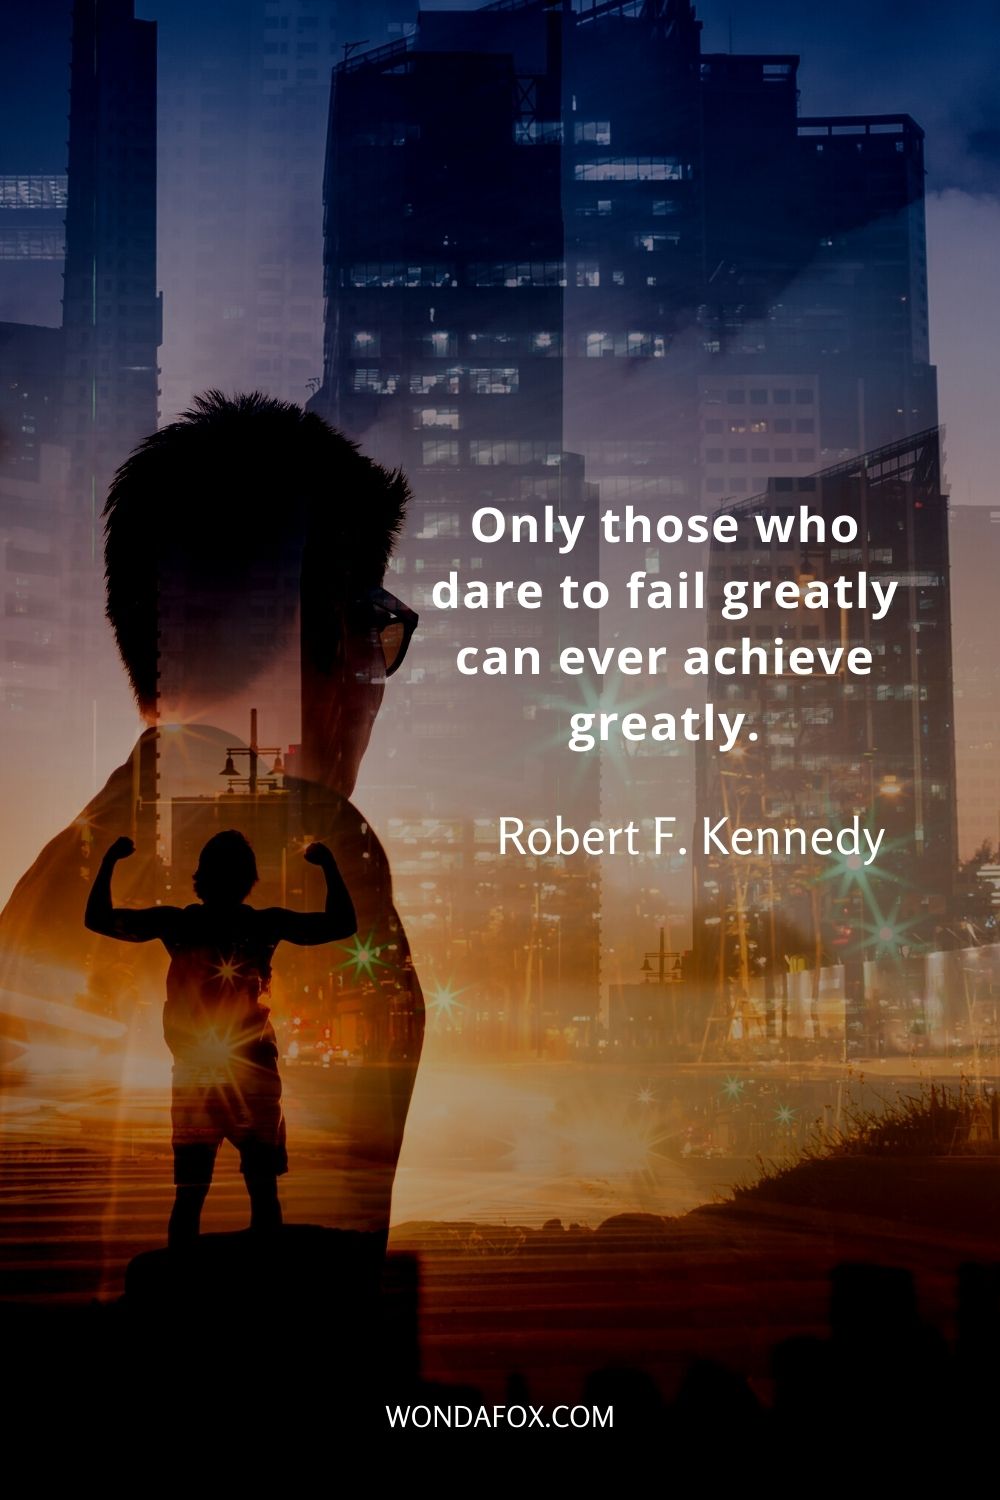 Only those who dare to fail greatly can ever achieve greatly. Get Back Up Quotes